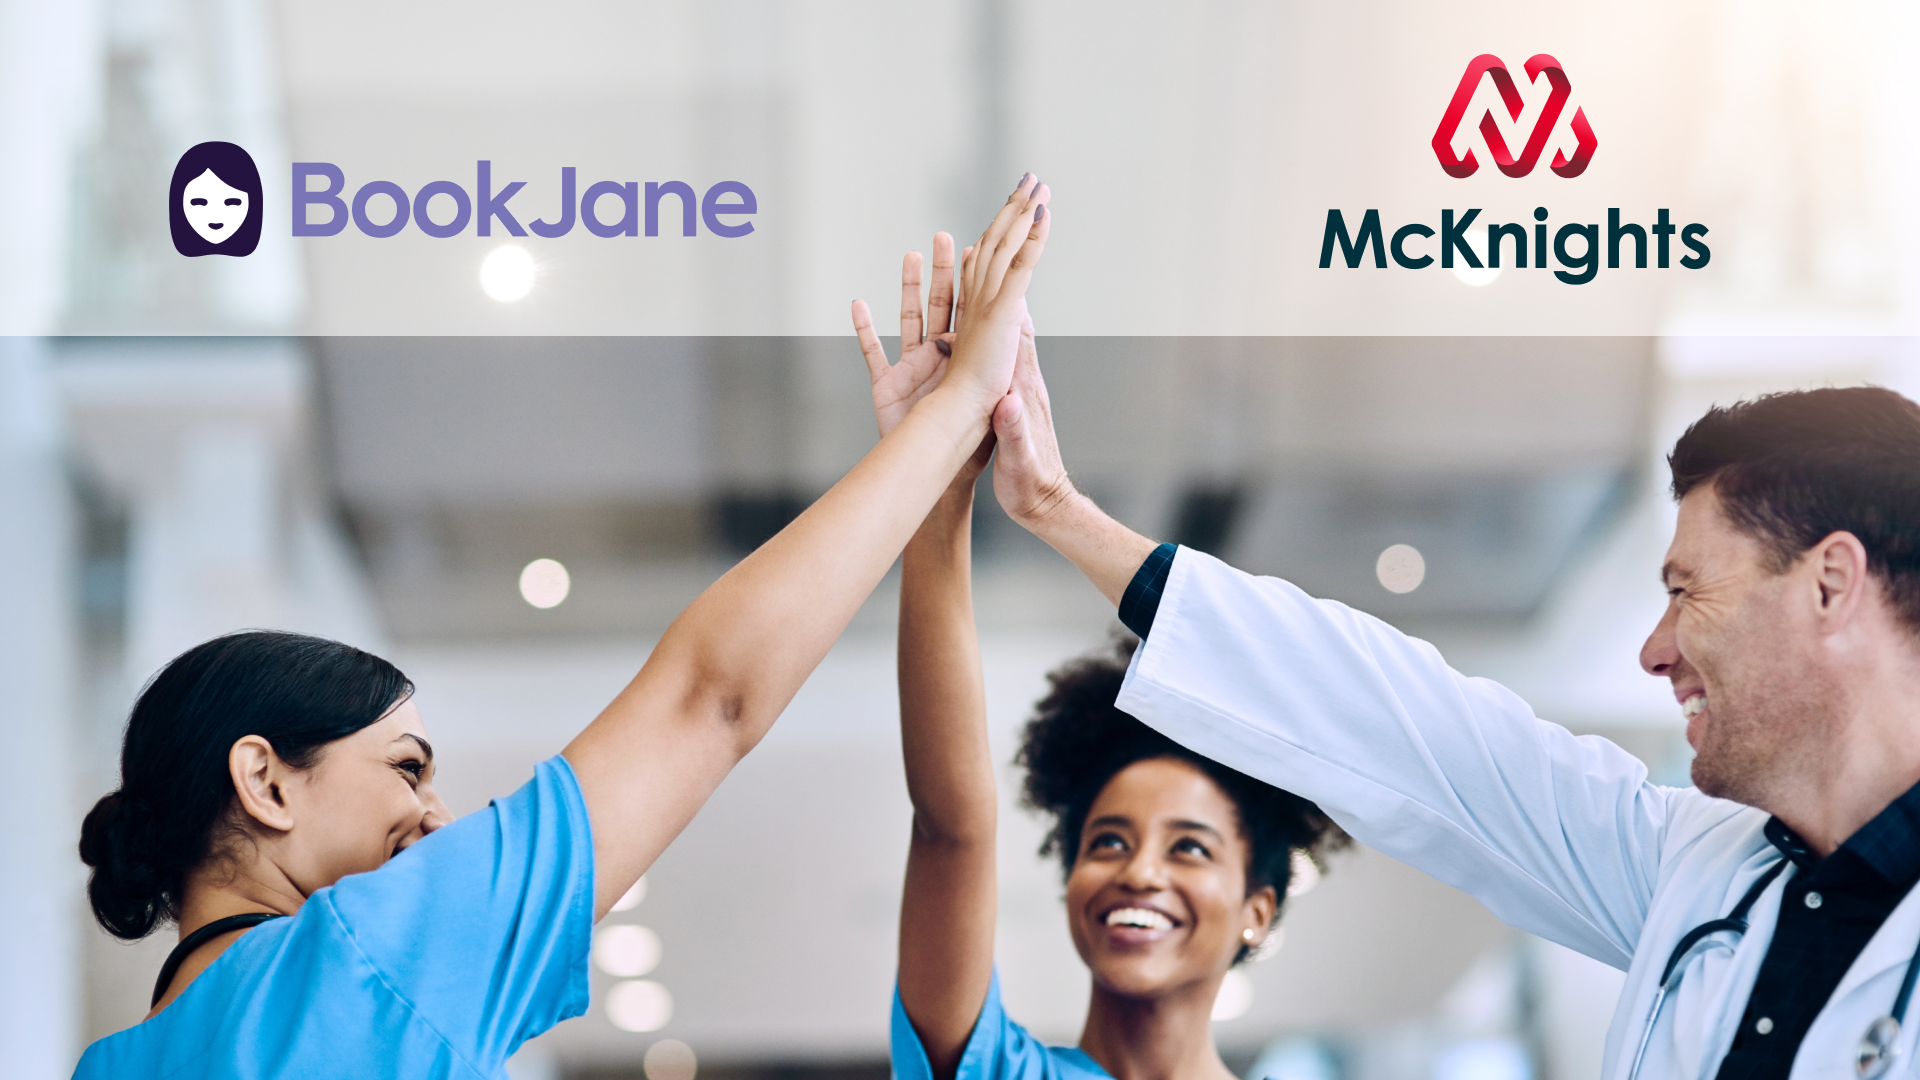 Image of thumbnail for BookJane and Mcknights panel press release on employee flexibility 